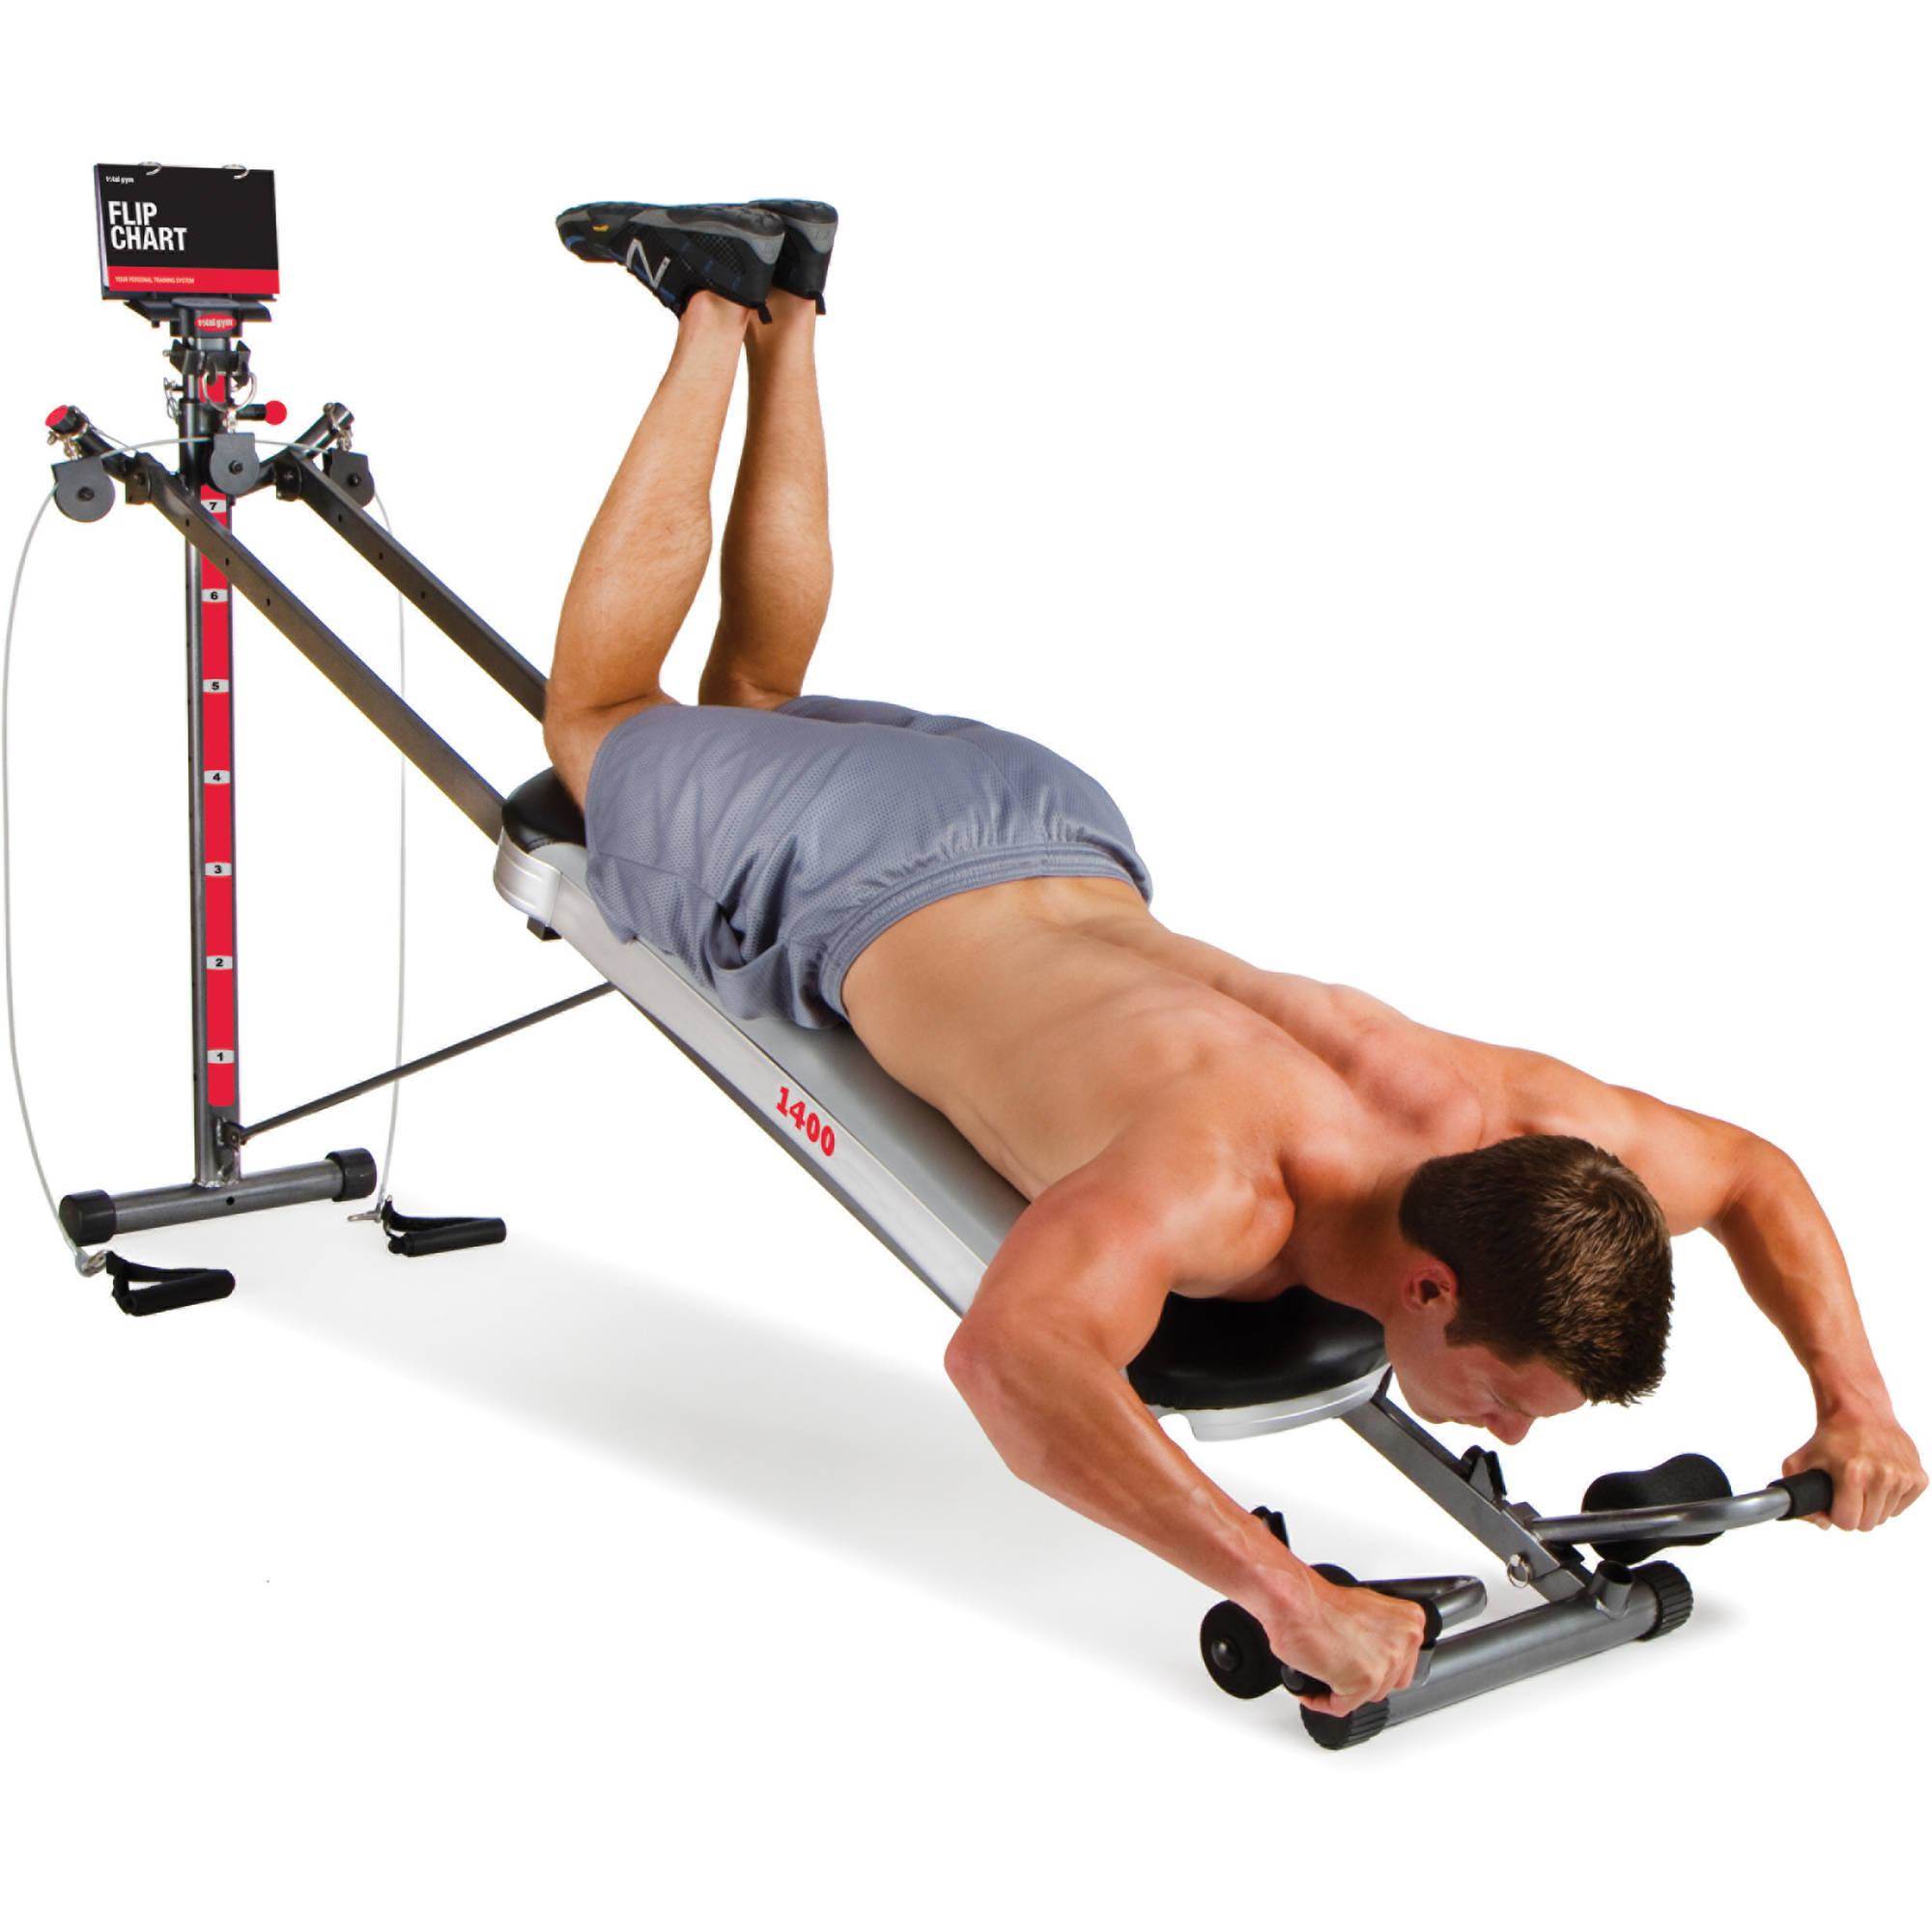 Total Gym 1400 Deluxe Home Fitness Exercise Machine Equipment with Workout DVD - image 8 of 15